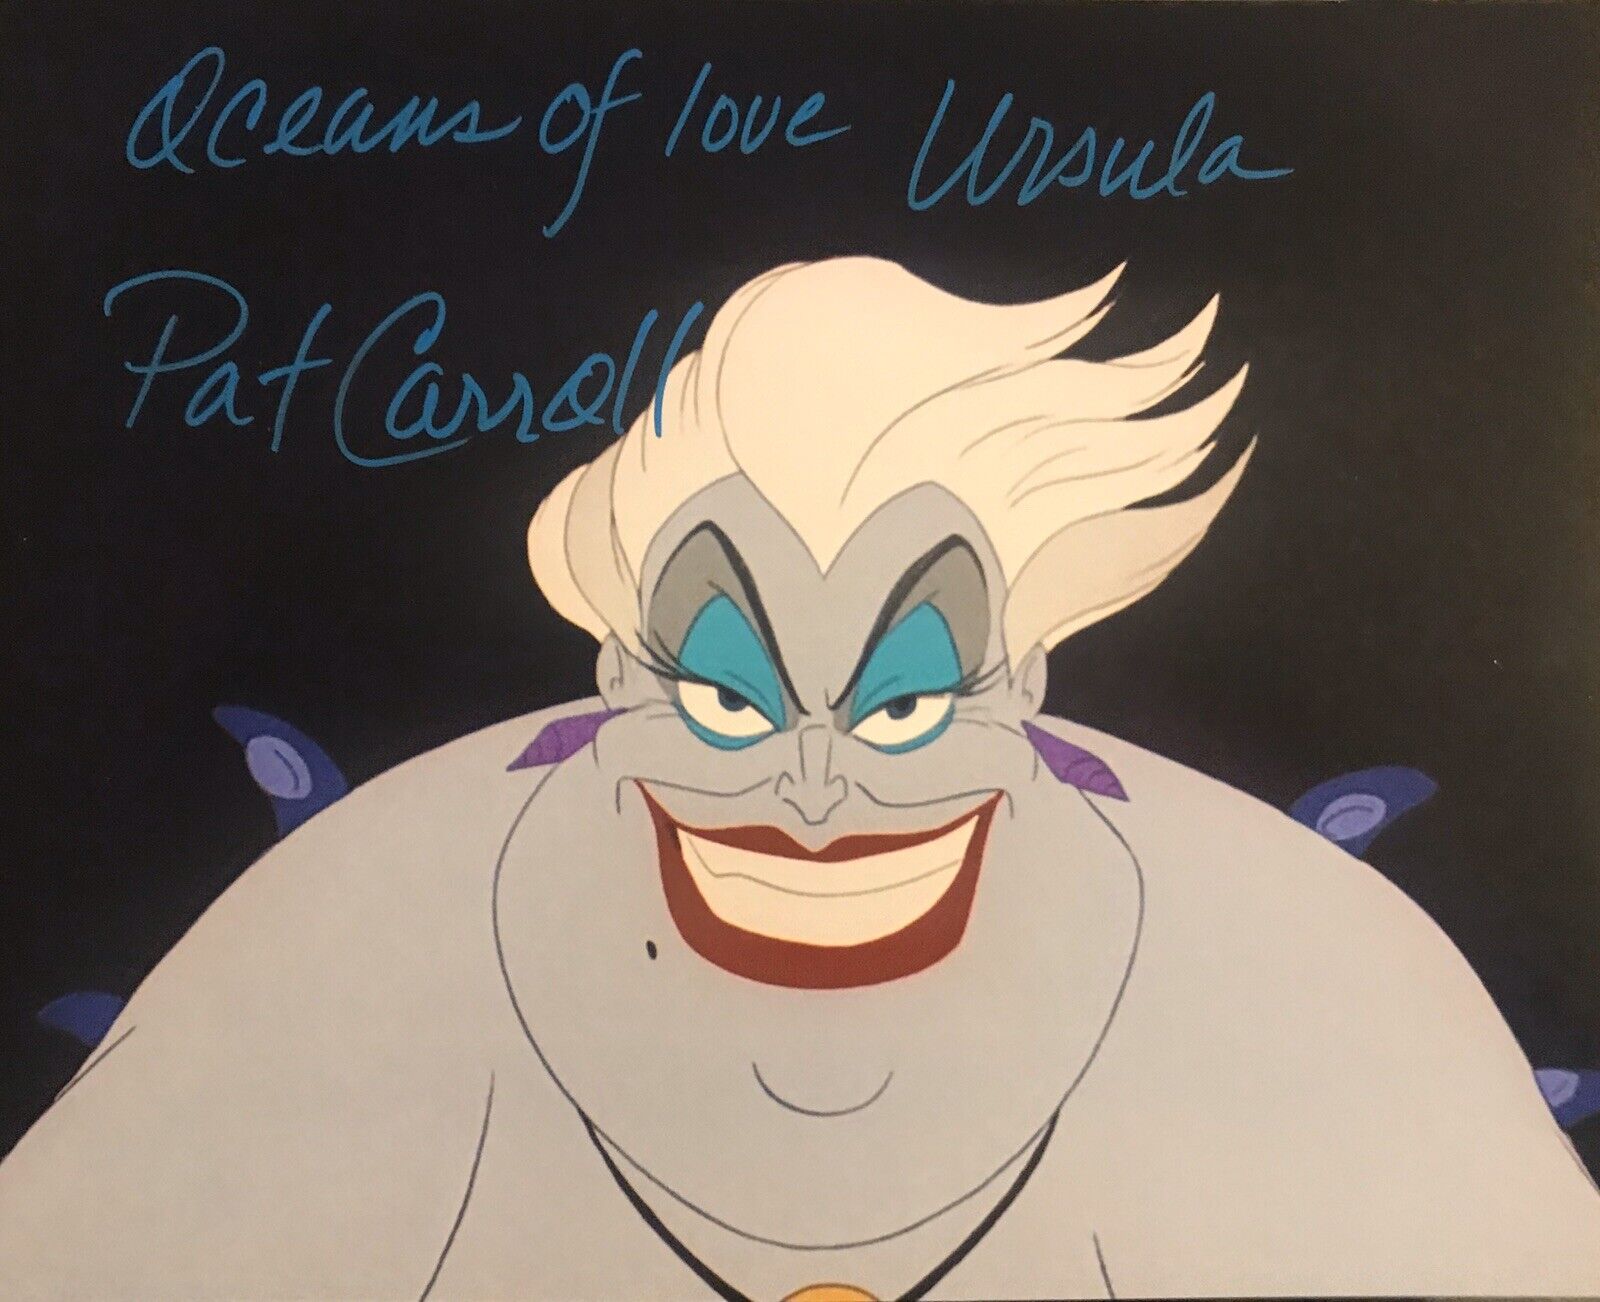 Pat Carroll Signed Autographed 8x10 Color Photo Poster painting Ursula Disney Little Mermaid